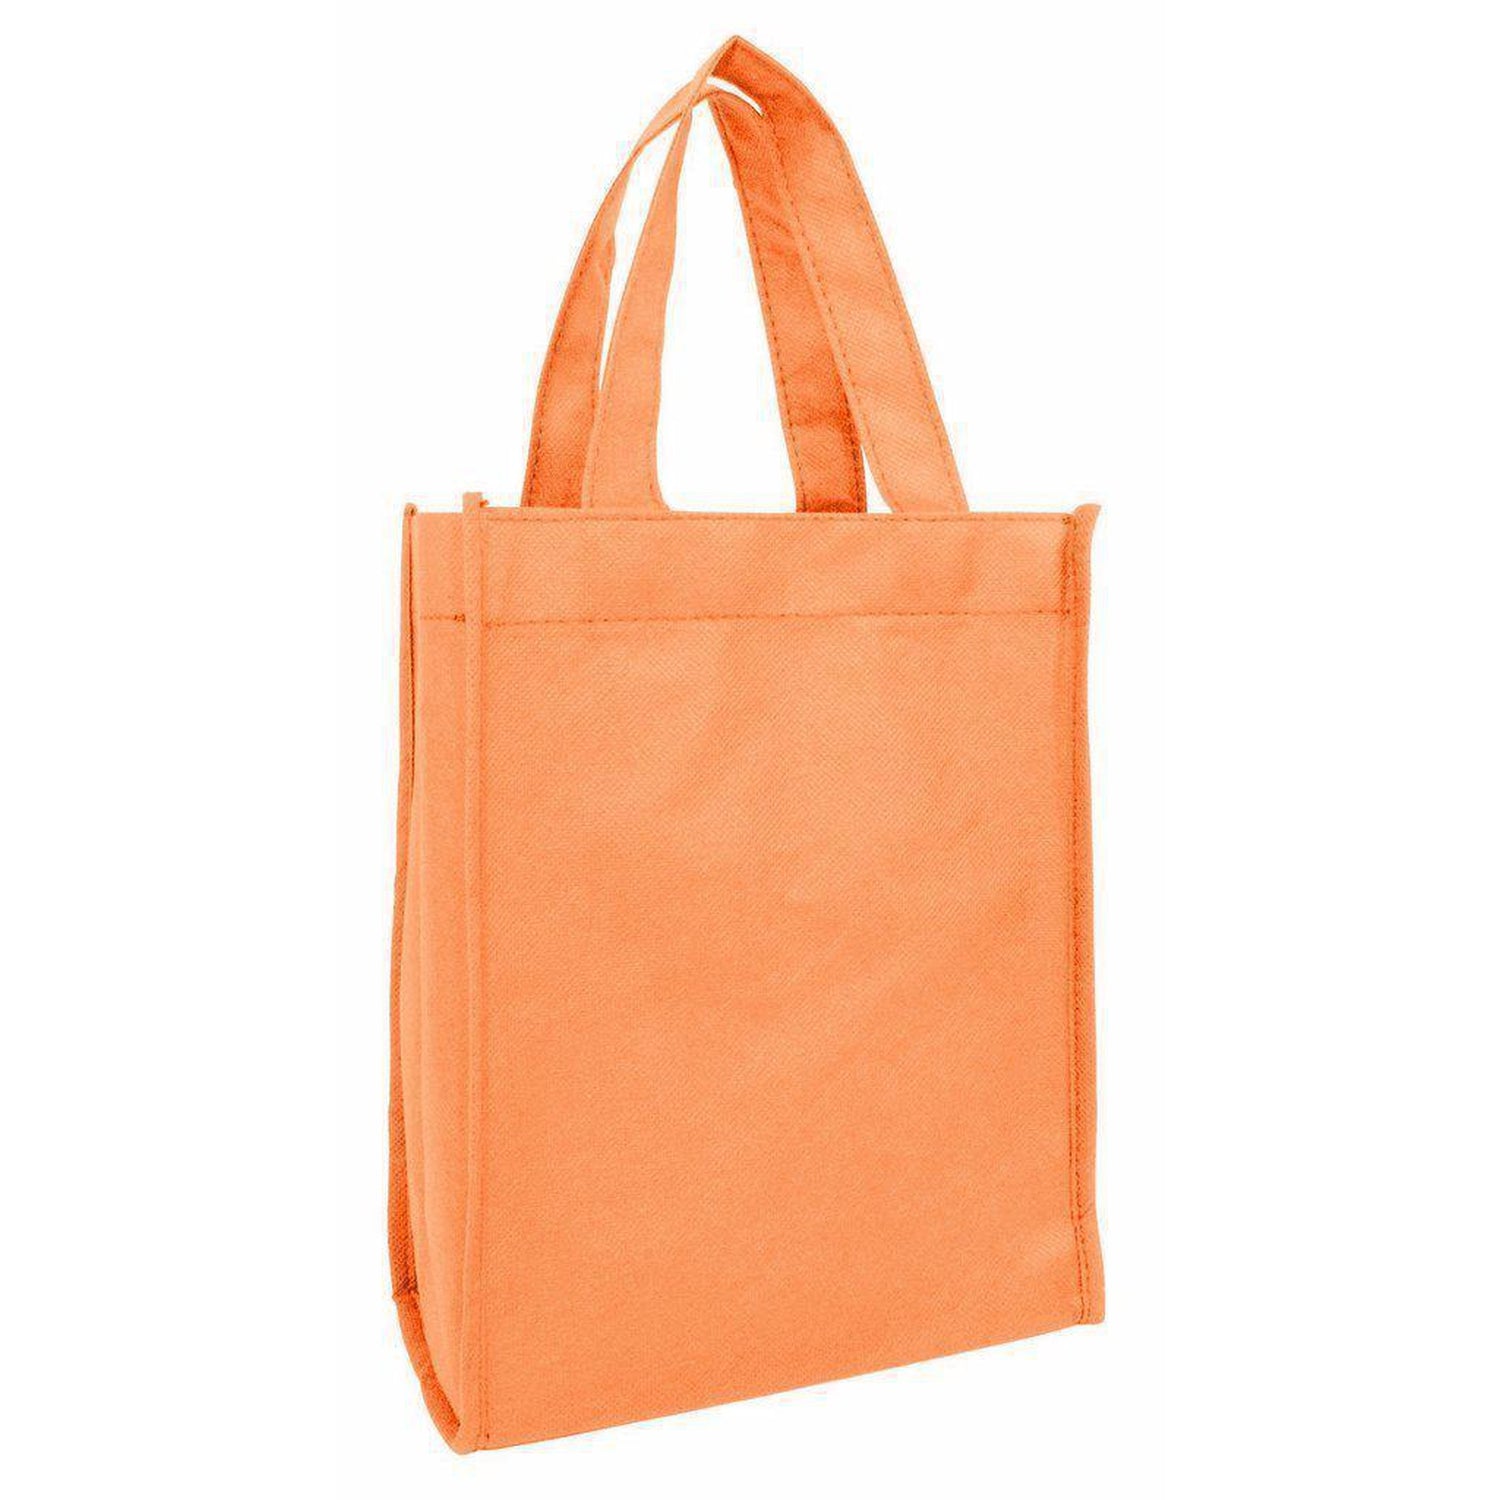 Small Tote Bags in Bulk - Non-Woven Gusseted Gift Bags Wholesale ...